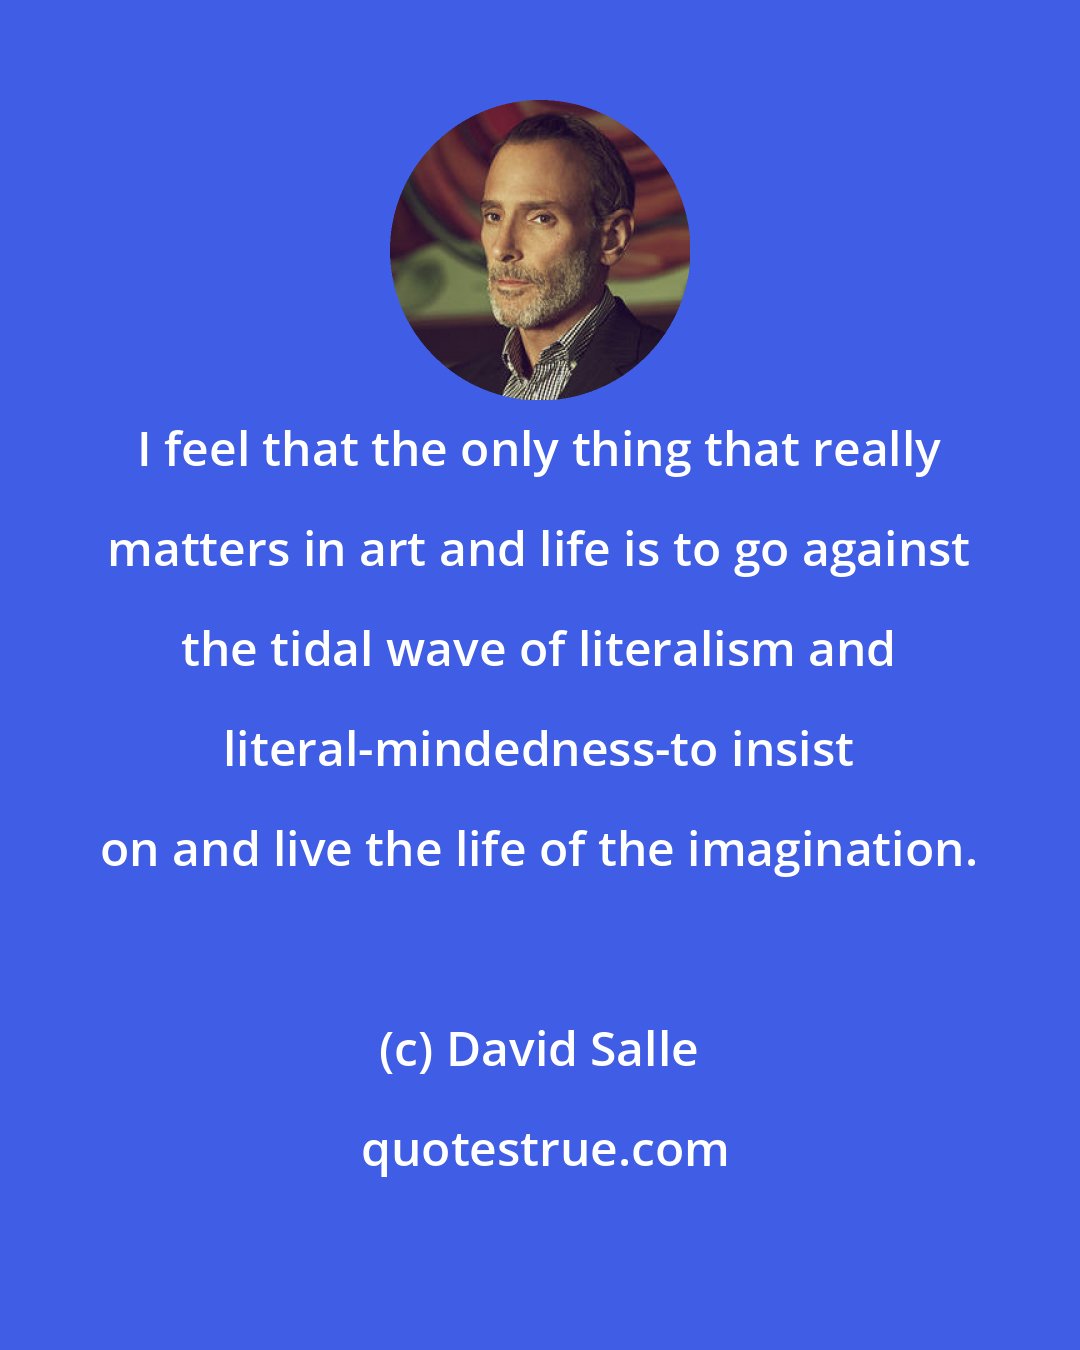 David Salle: I feel that the only thing that really matters in art and life is to go against the tidal wave of literalism and literal-mindedness-to insist on and live the life of the imagination.